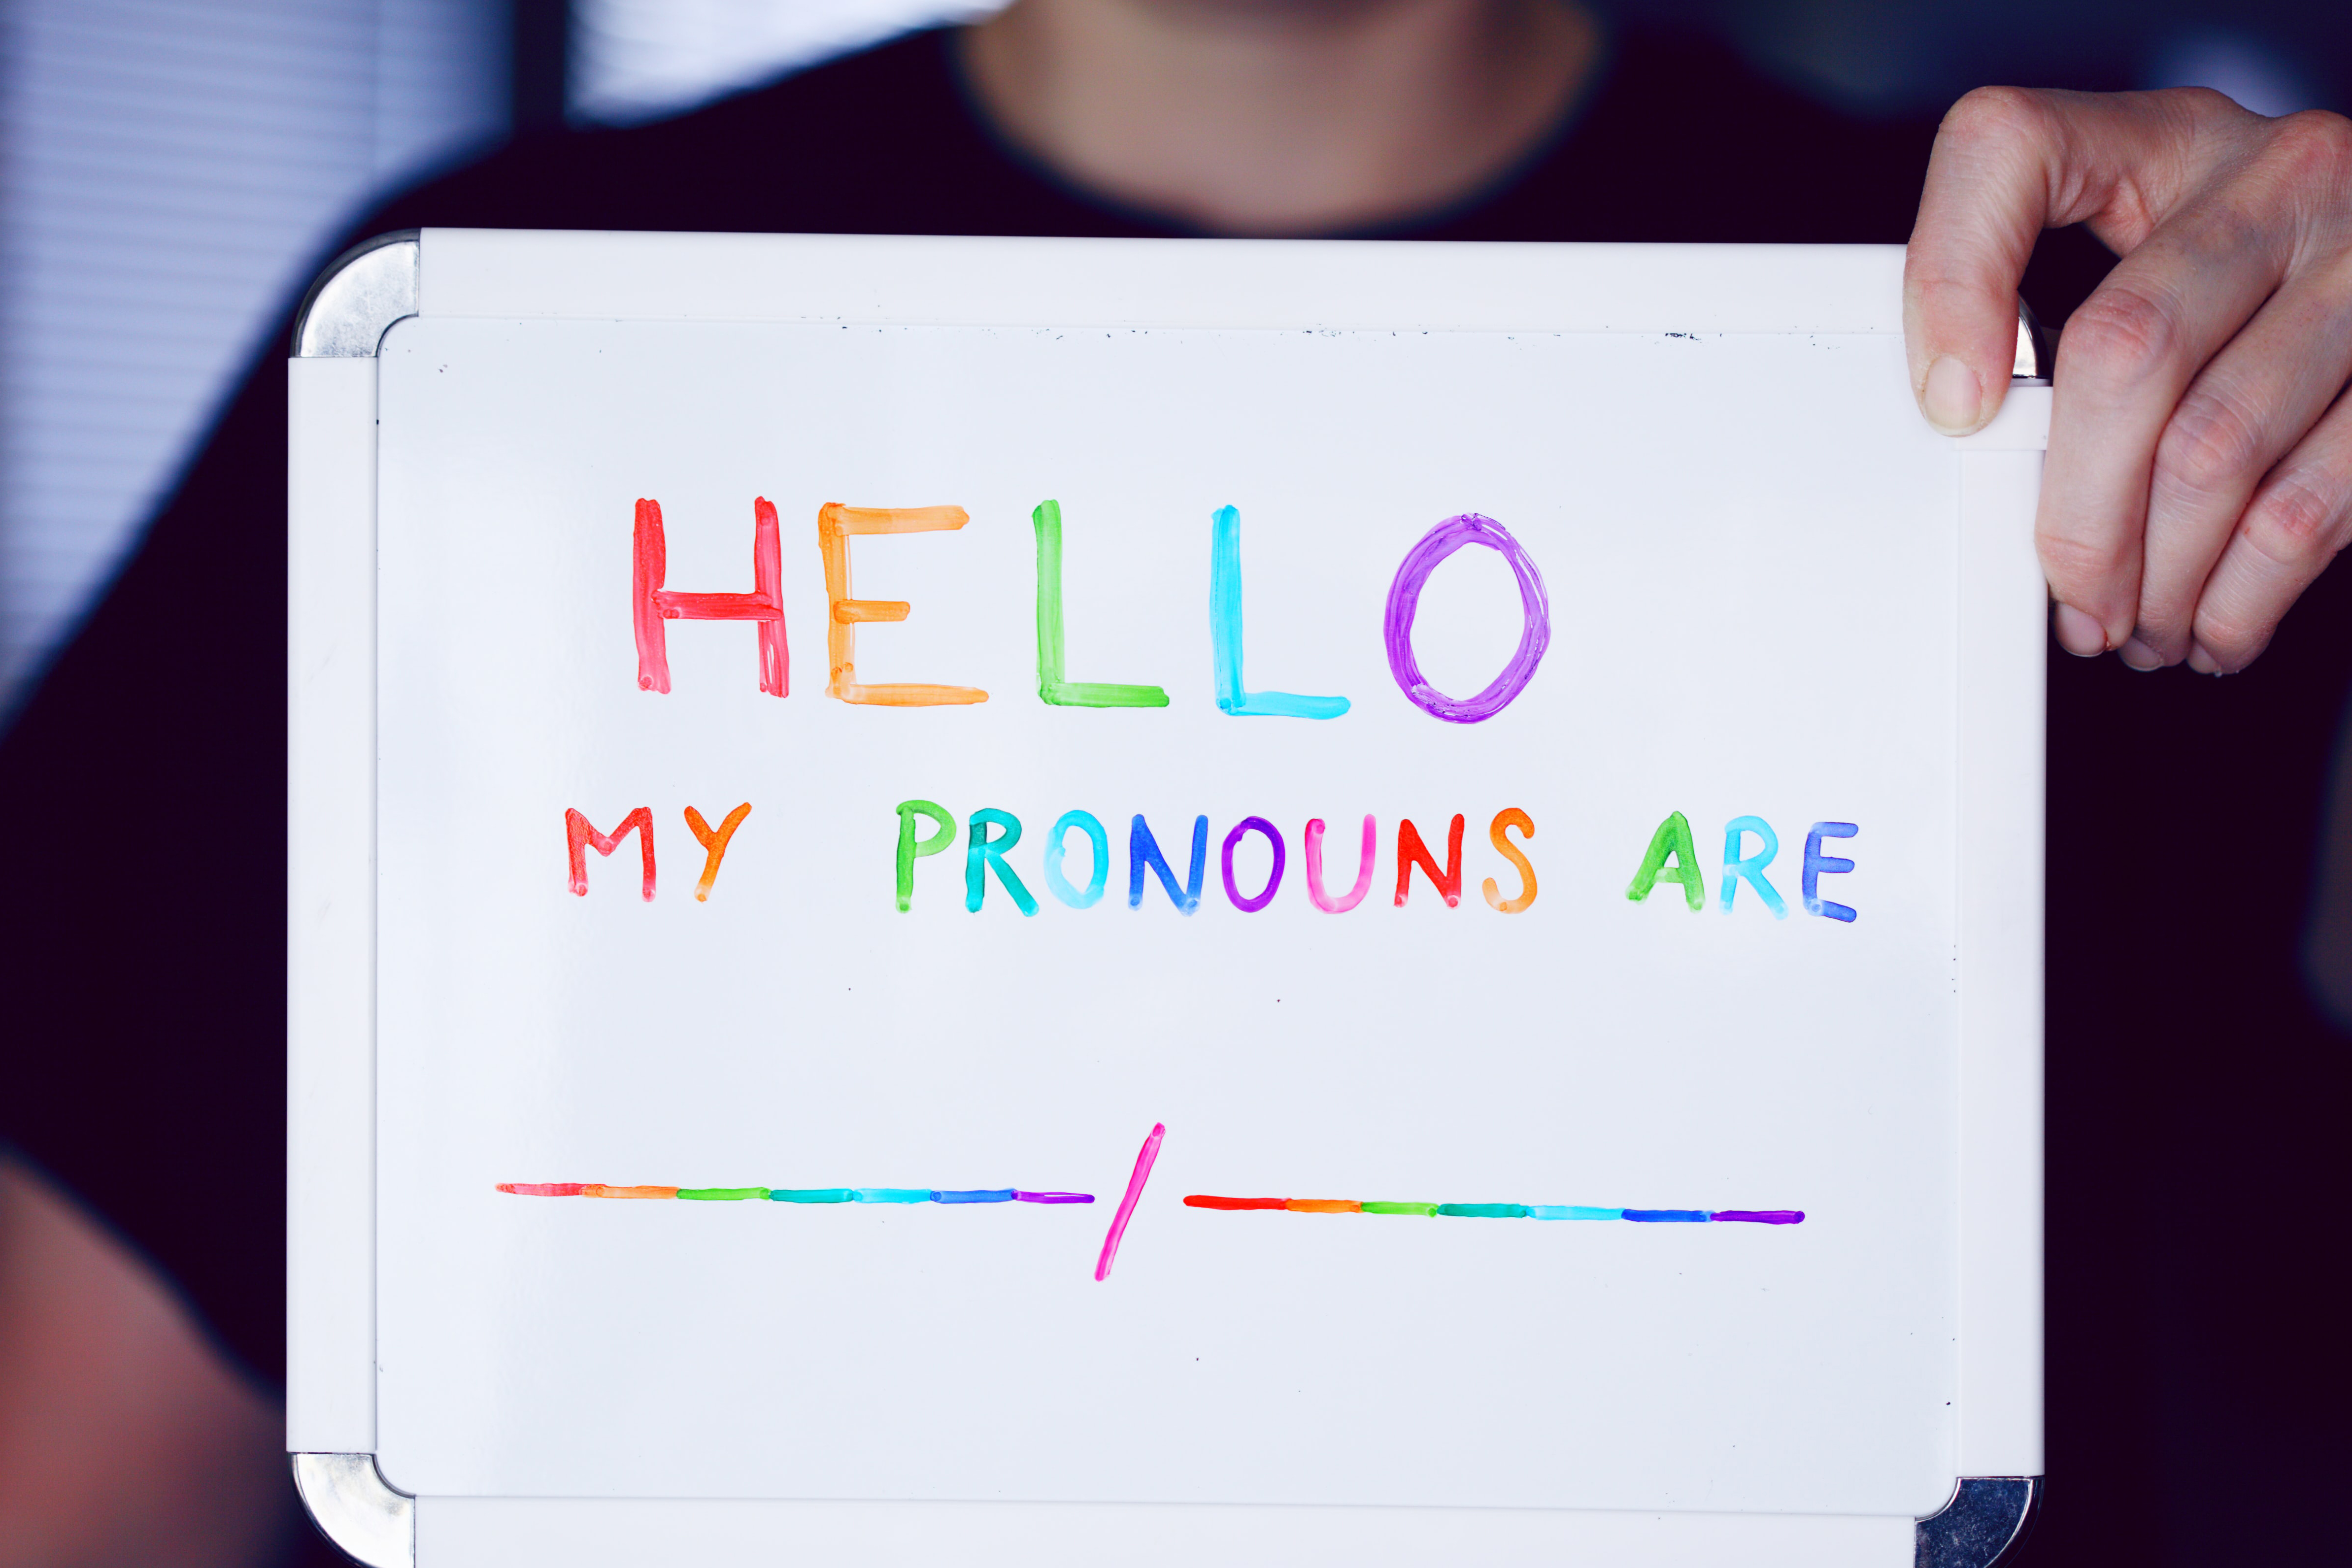 A white person holds up a whiteboard with the words "hello my pronouns are" and two blanks with a slash so one could write them in. The words are written in rainbow colors.